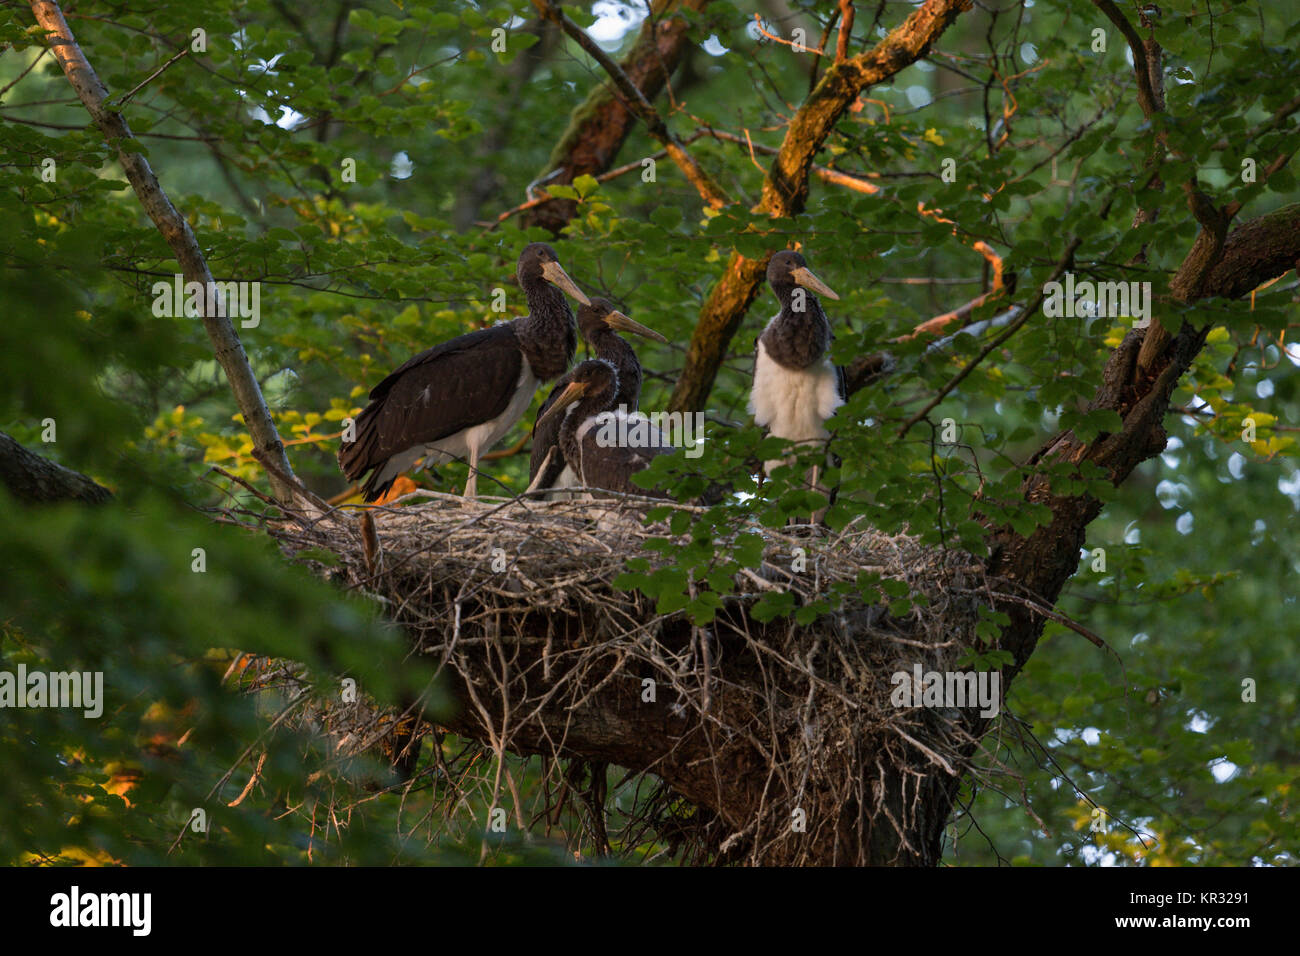 Black Stork / Storks ( Ciconia nigra ), young chicks sitting, standing in their nest, hidden in a treetop of a beech, almost fledged, wildlife, Europe Stock Photo